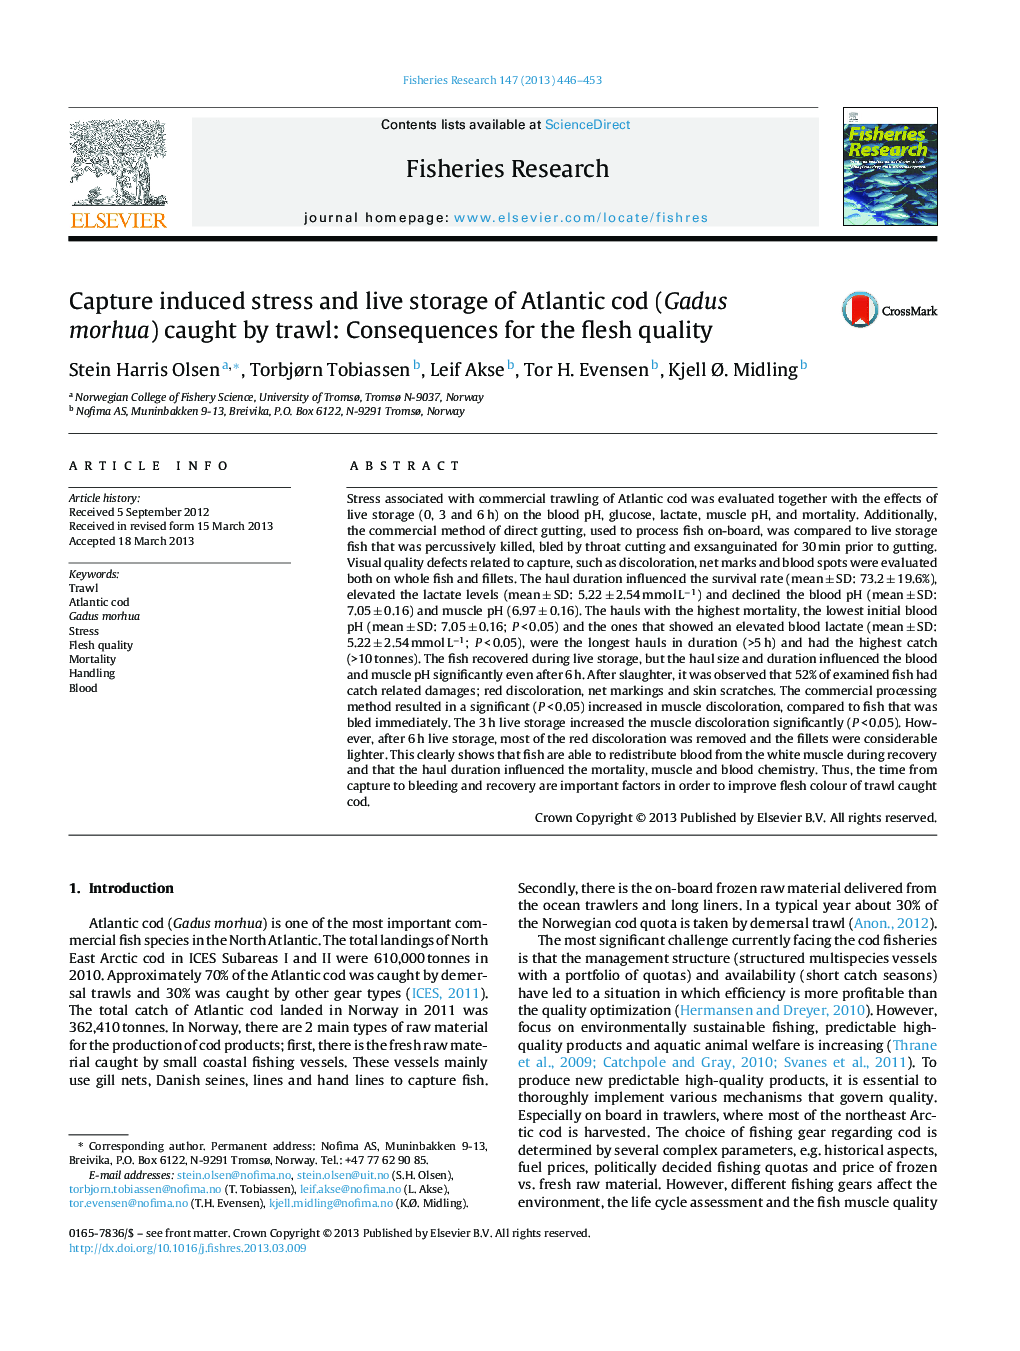 Capture induced stress and live storage of Atlantic cod (Gadus morhua) caught by trawl: Consequences for the flesh quality